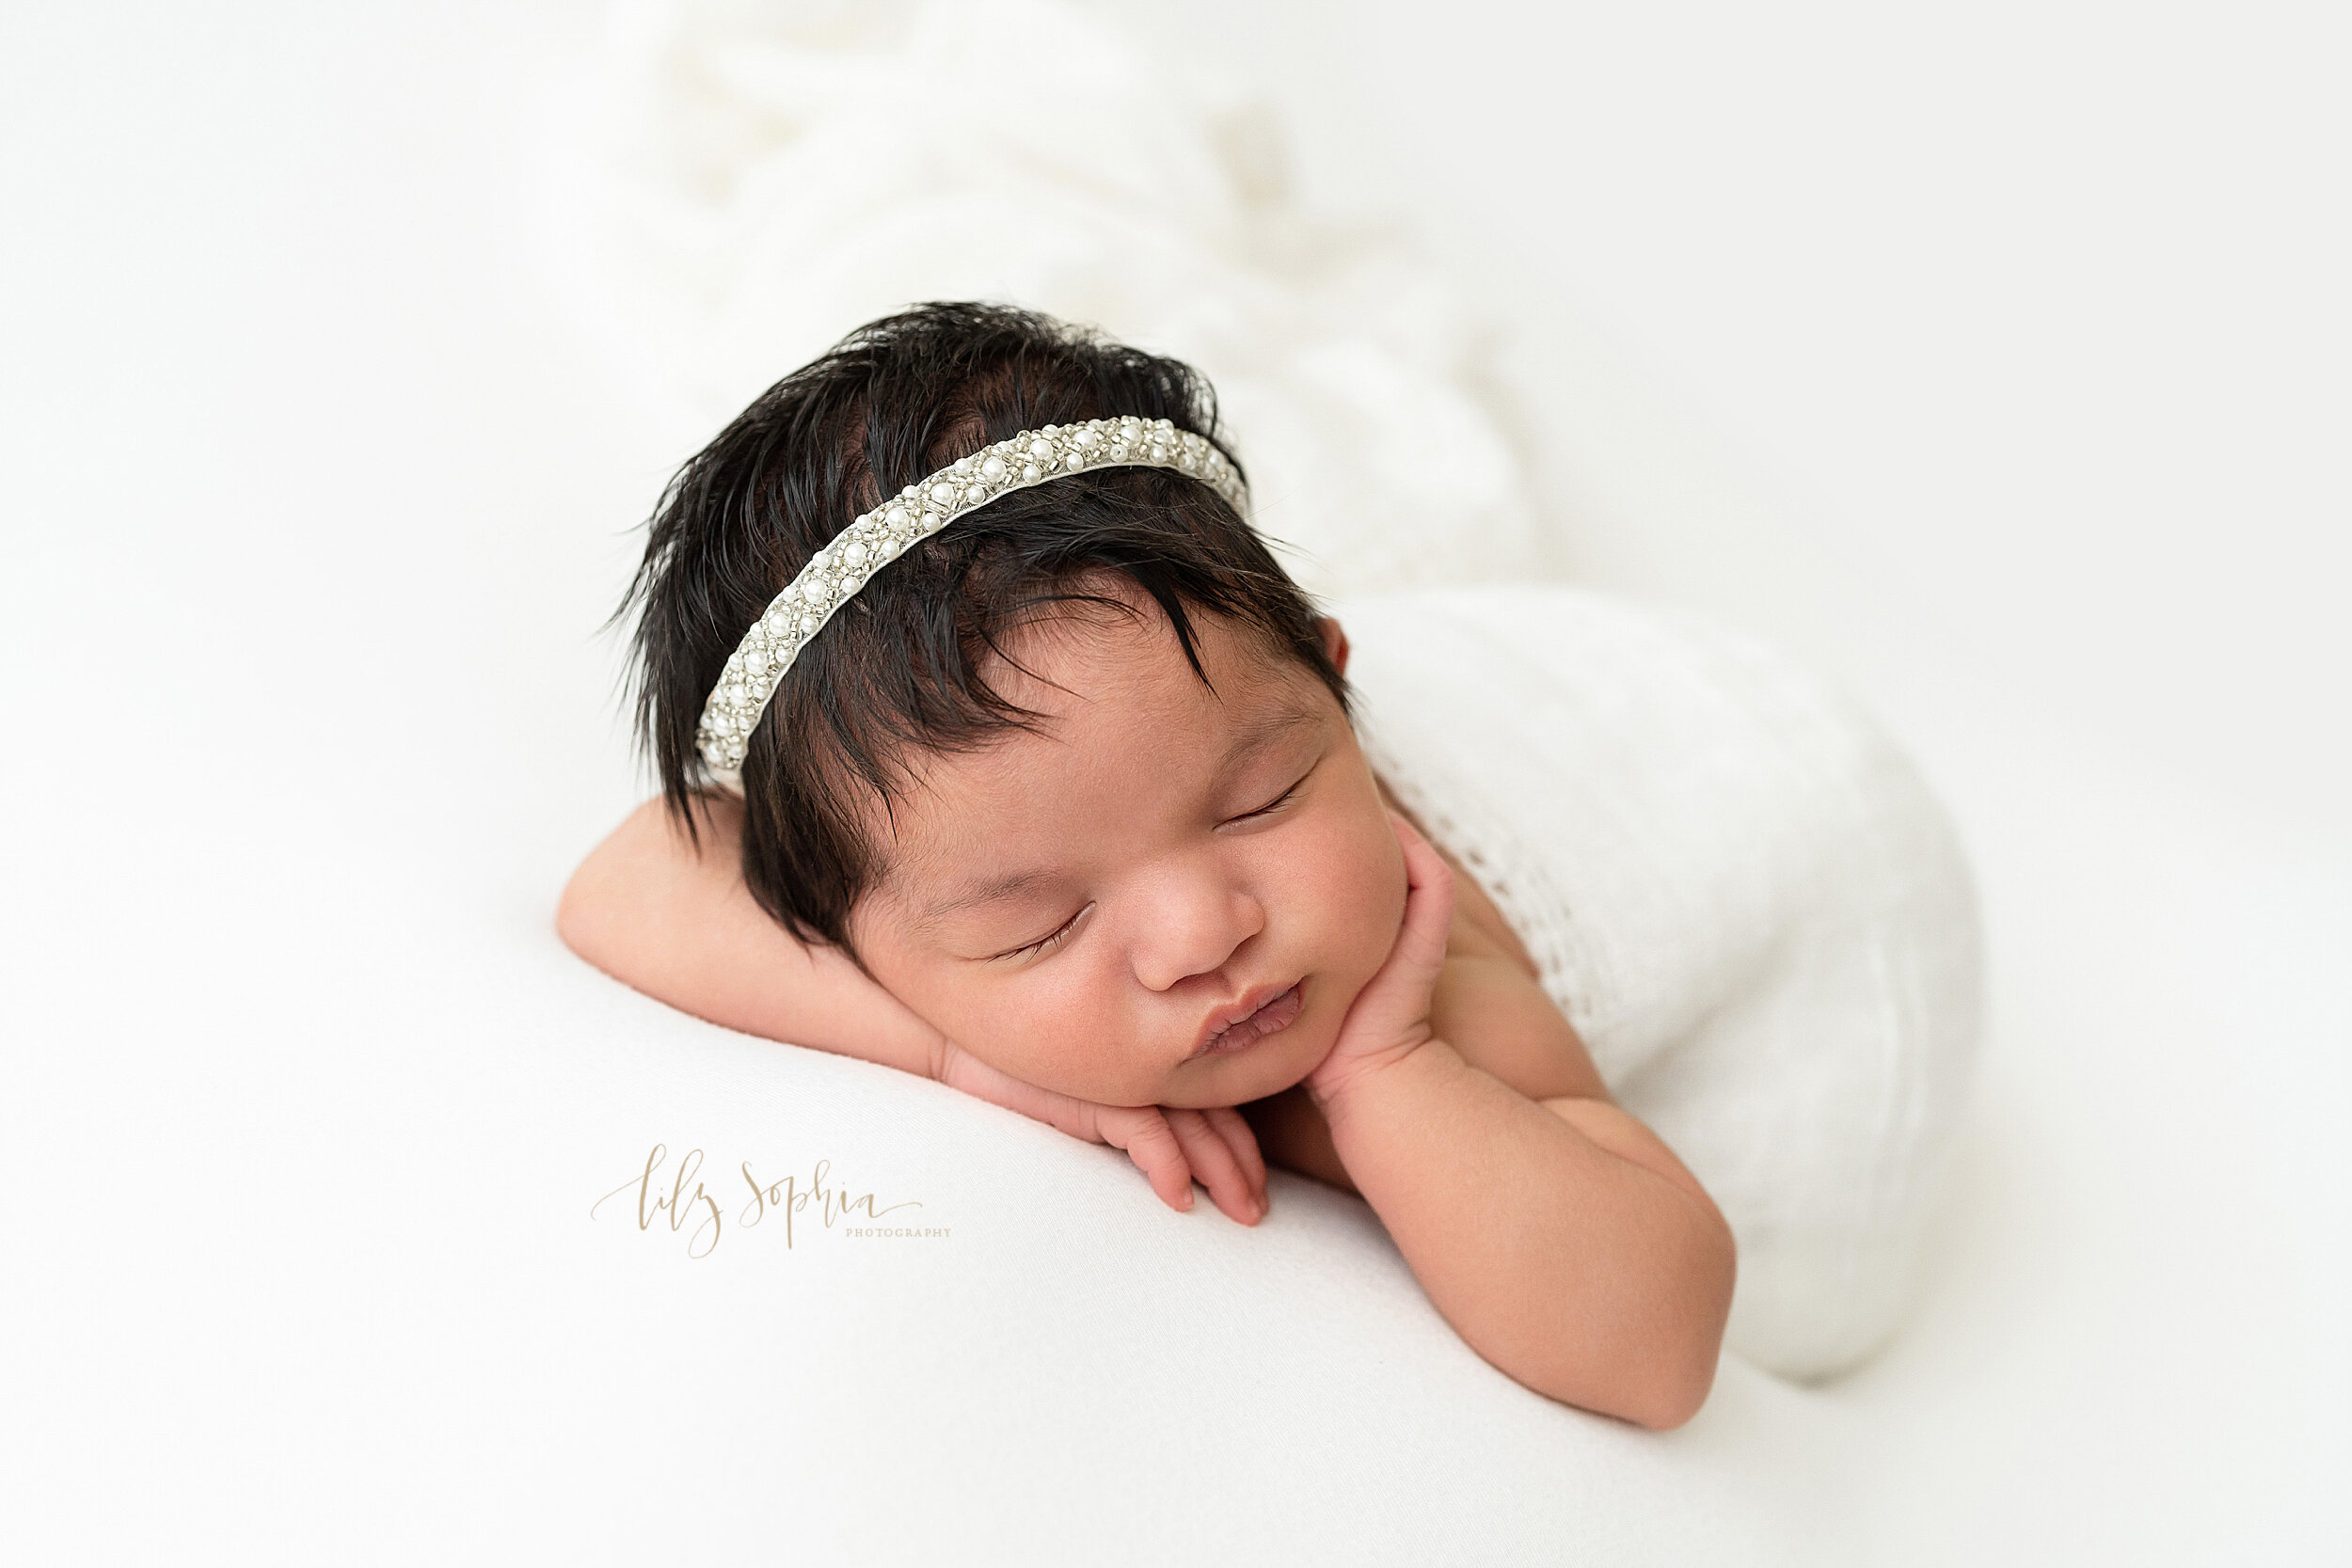  Newborn photo session with a sleeping baby girl lying on her stomach  with one hand under her head and wearing a pearl headband while her other hand rests on her cheek taken in natural light in a studio near the Old Fourth Ward area of Atlanta, Geor